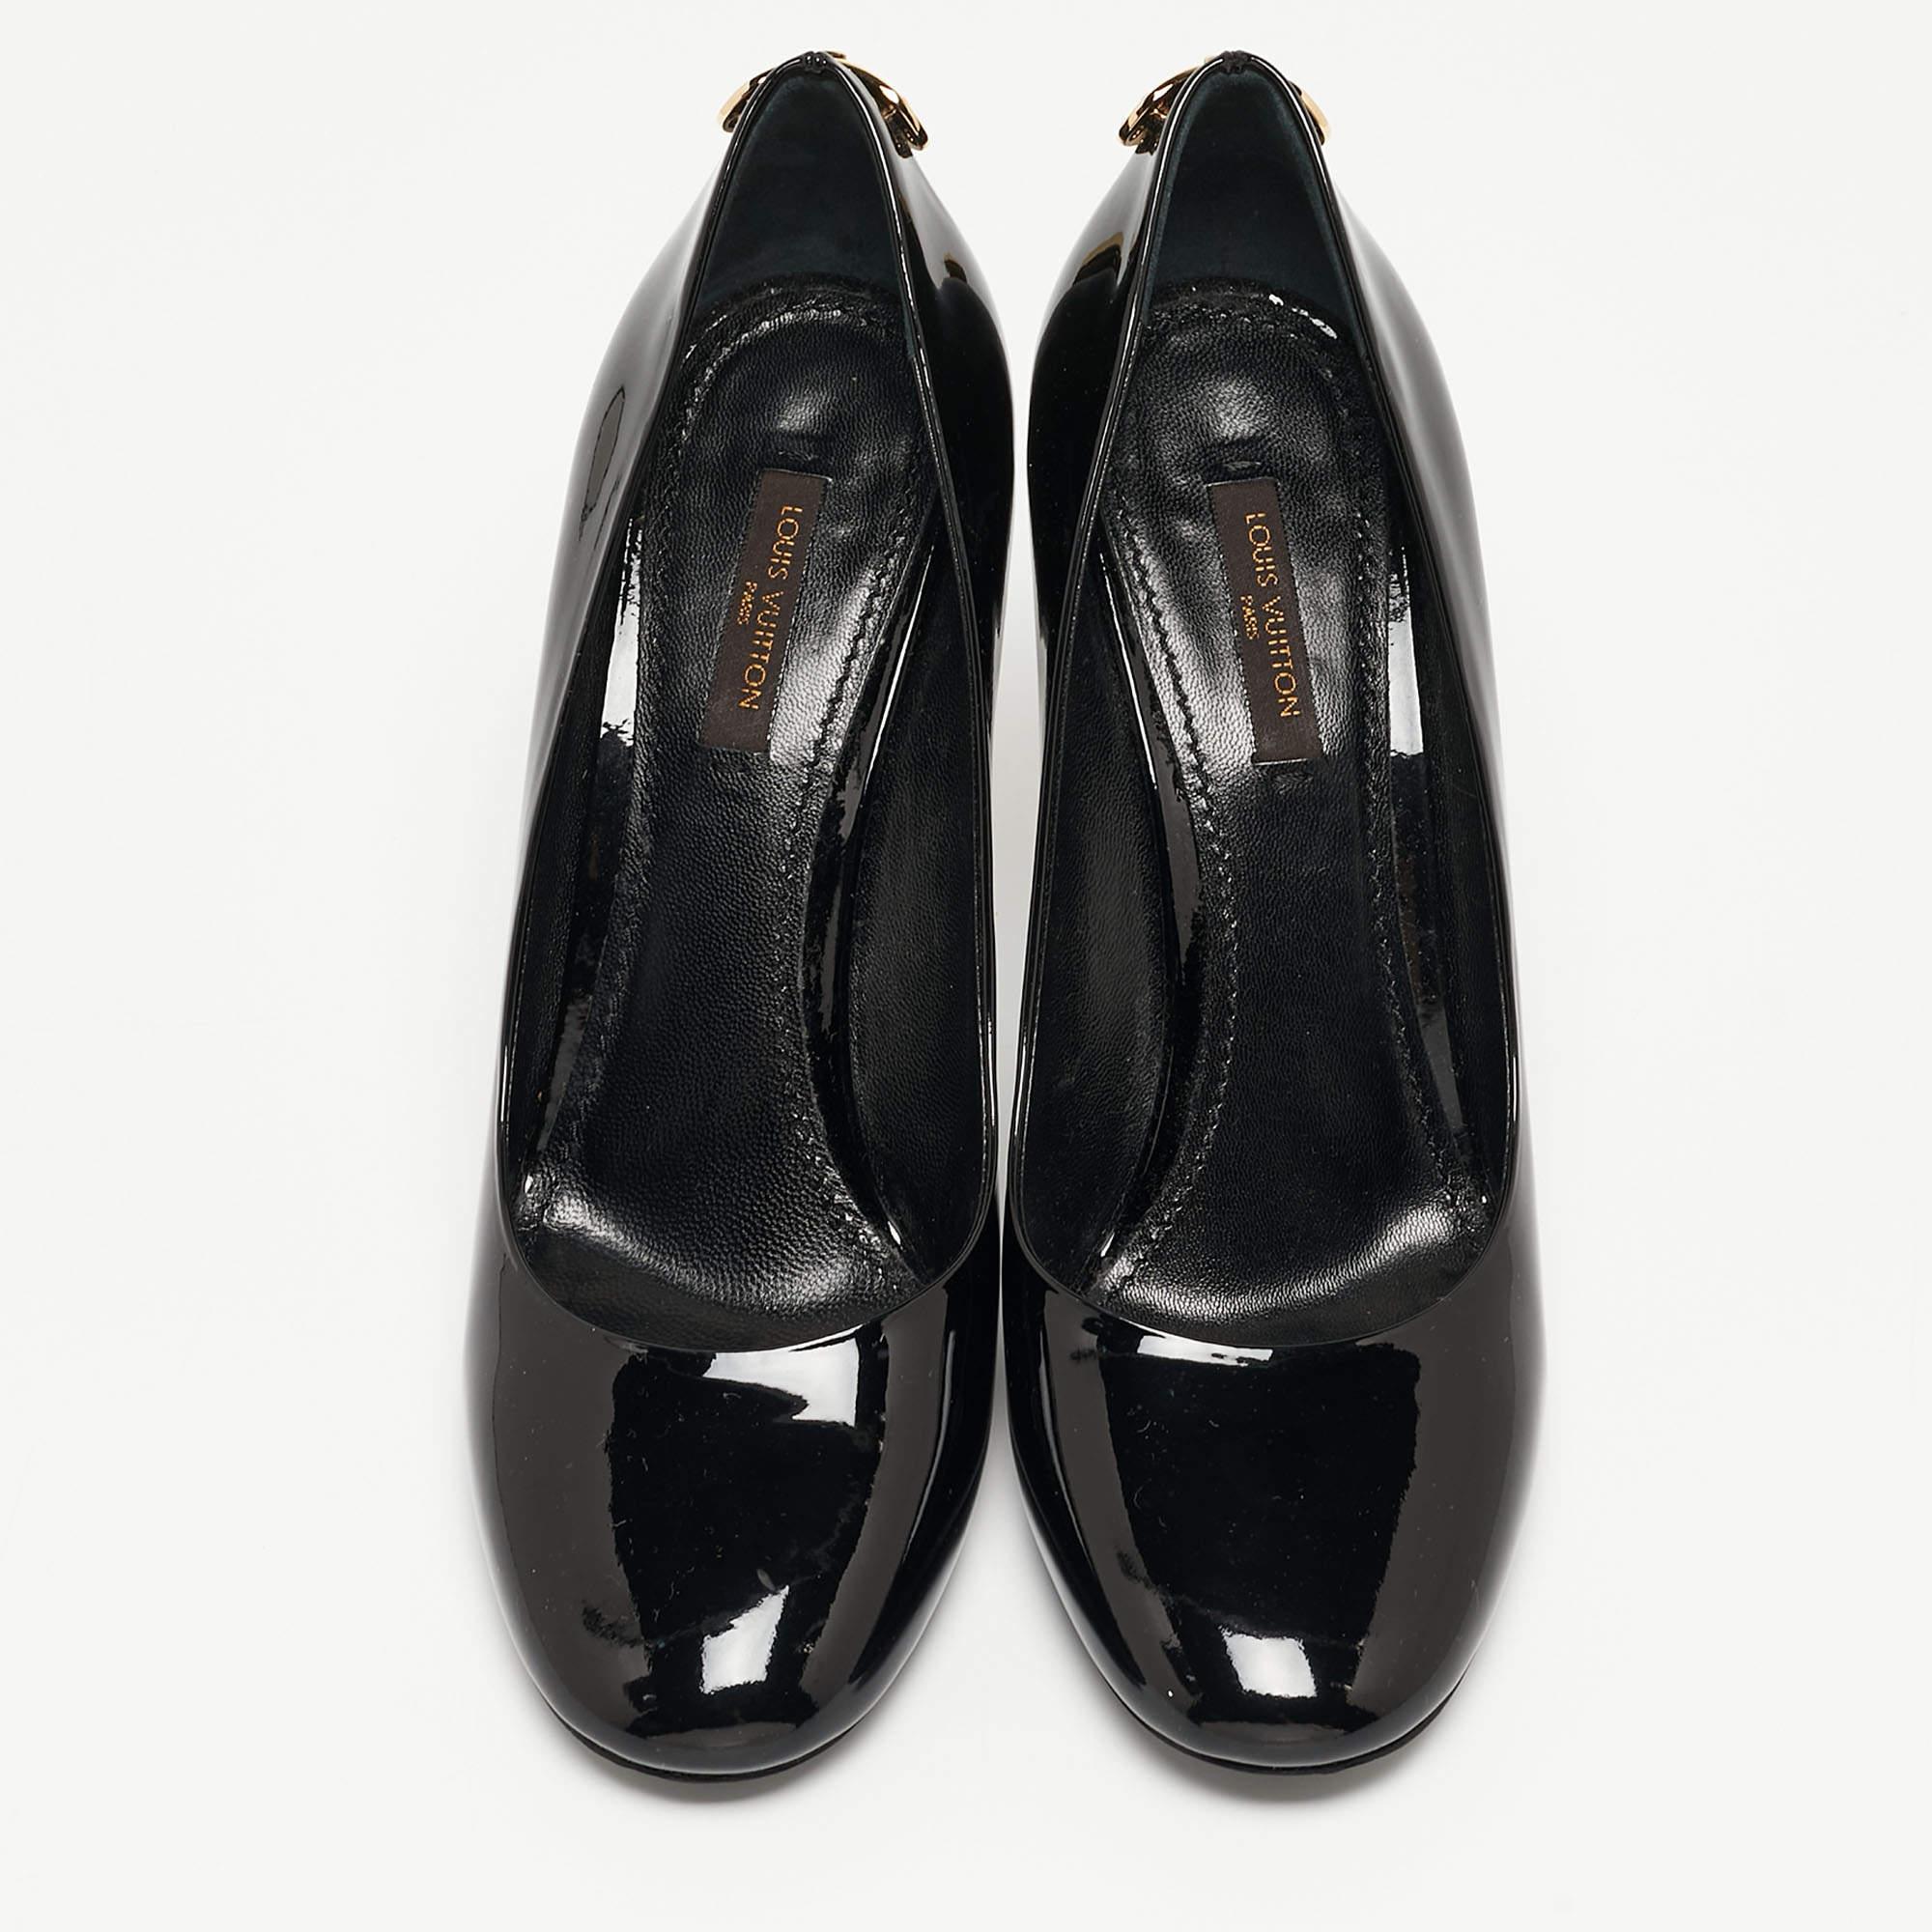 Exhibit an elegant style with this pair of pumps. These elegant shoes are crafted from quality materials. They are set on durable soles and sleek heels.

Includes
Original Dustbag, Original Box, Extra Heel Tips